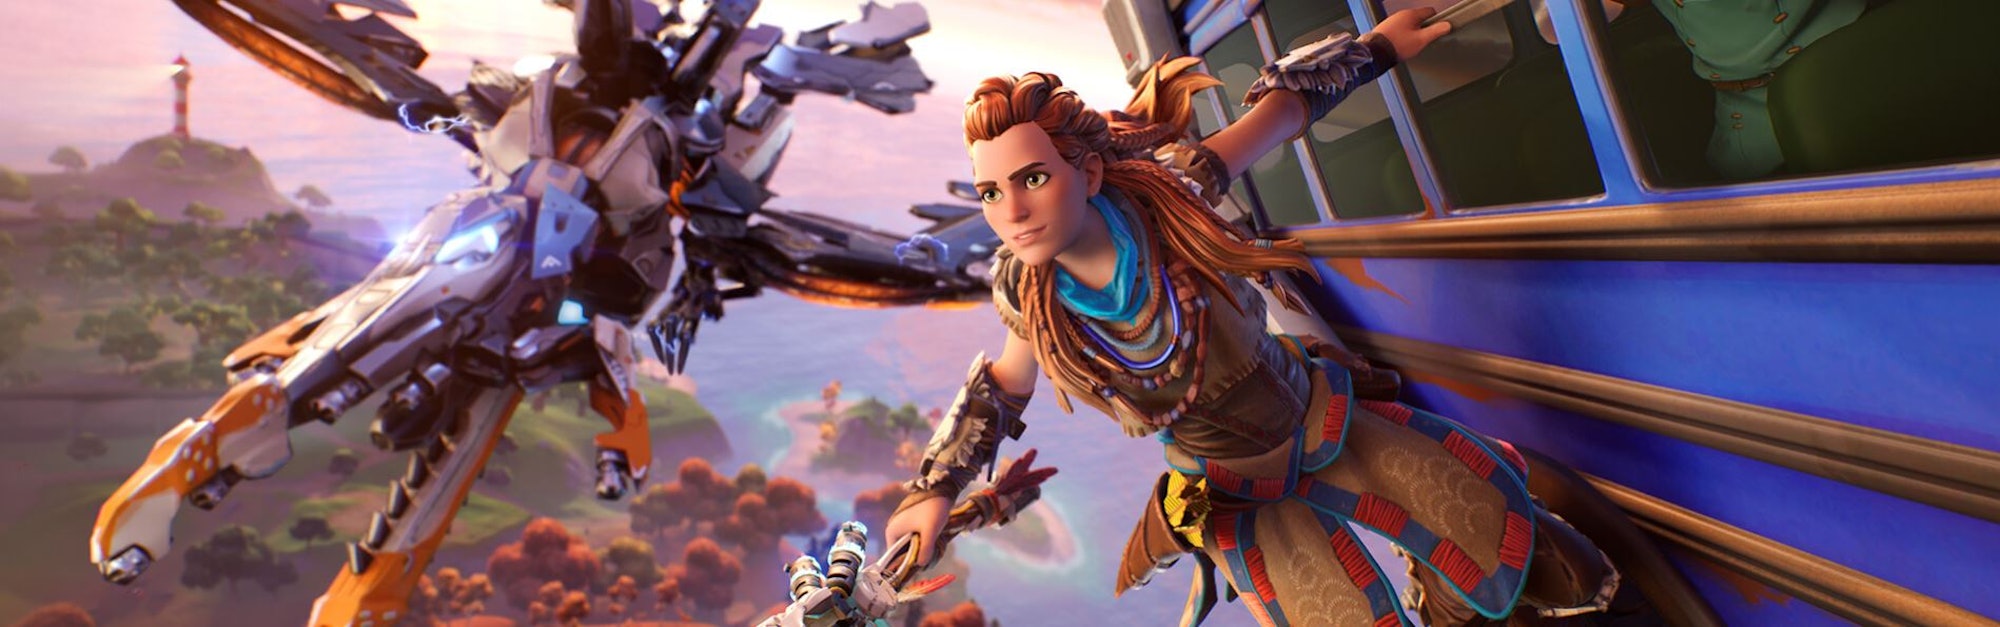 Fortnite Aloy Skin Release Date And Horizon Zero Dawn Crossover Event Detailed